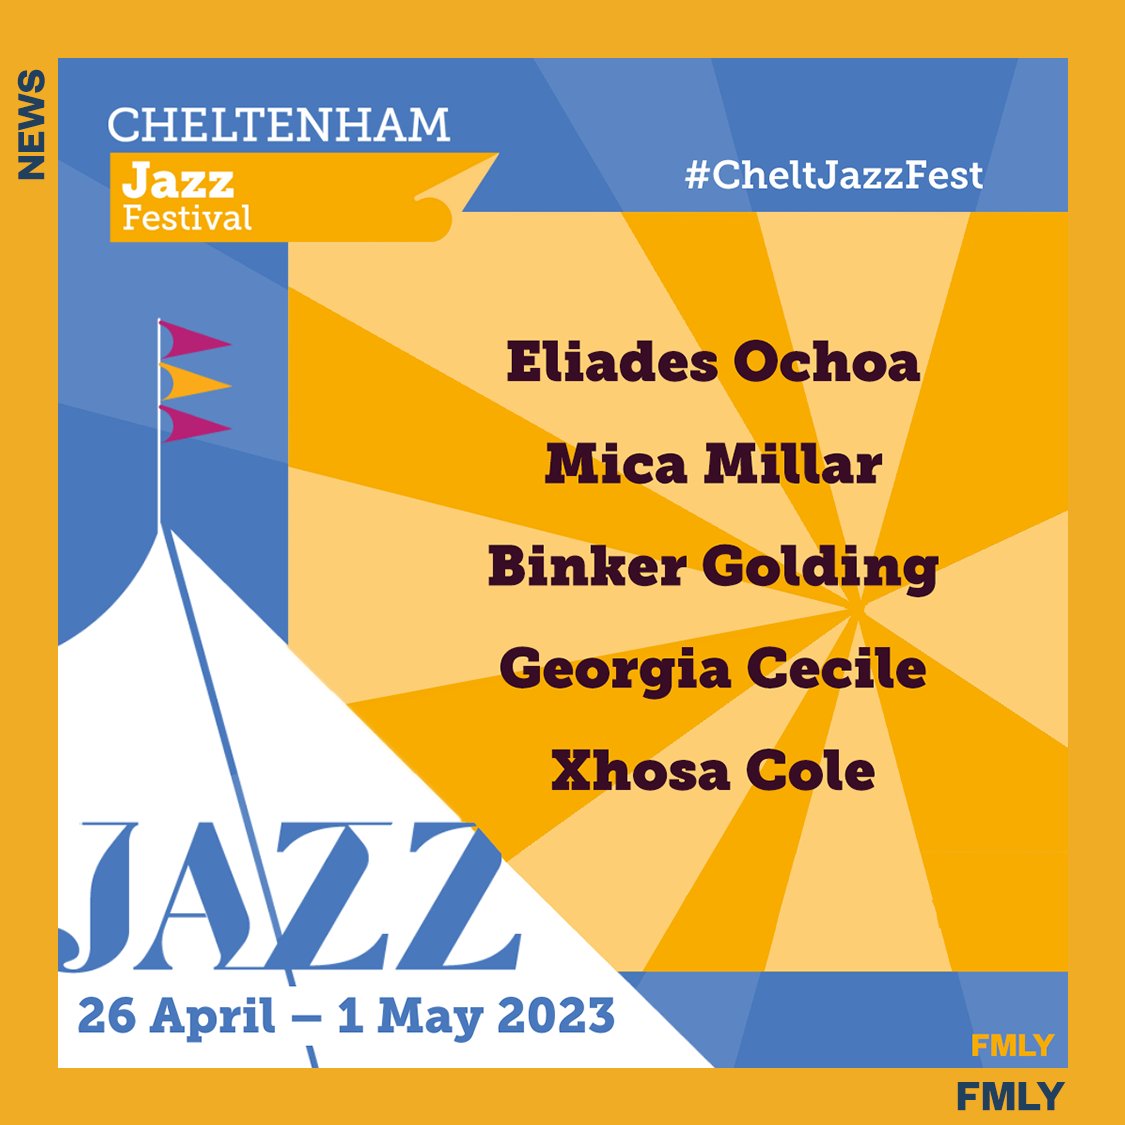 Don't miss out on this year's @cheltfestivals, with no less that 5 expectional FMLY artists set to play

tickets on sale 01/03 

@EliadesOchoa
@Mica_Millar
@BinkerGolding
@georgia_cecile